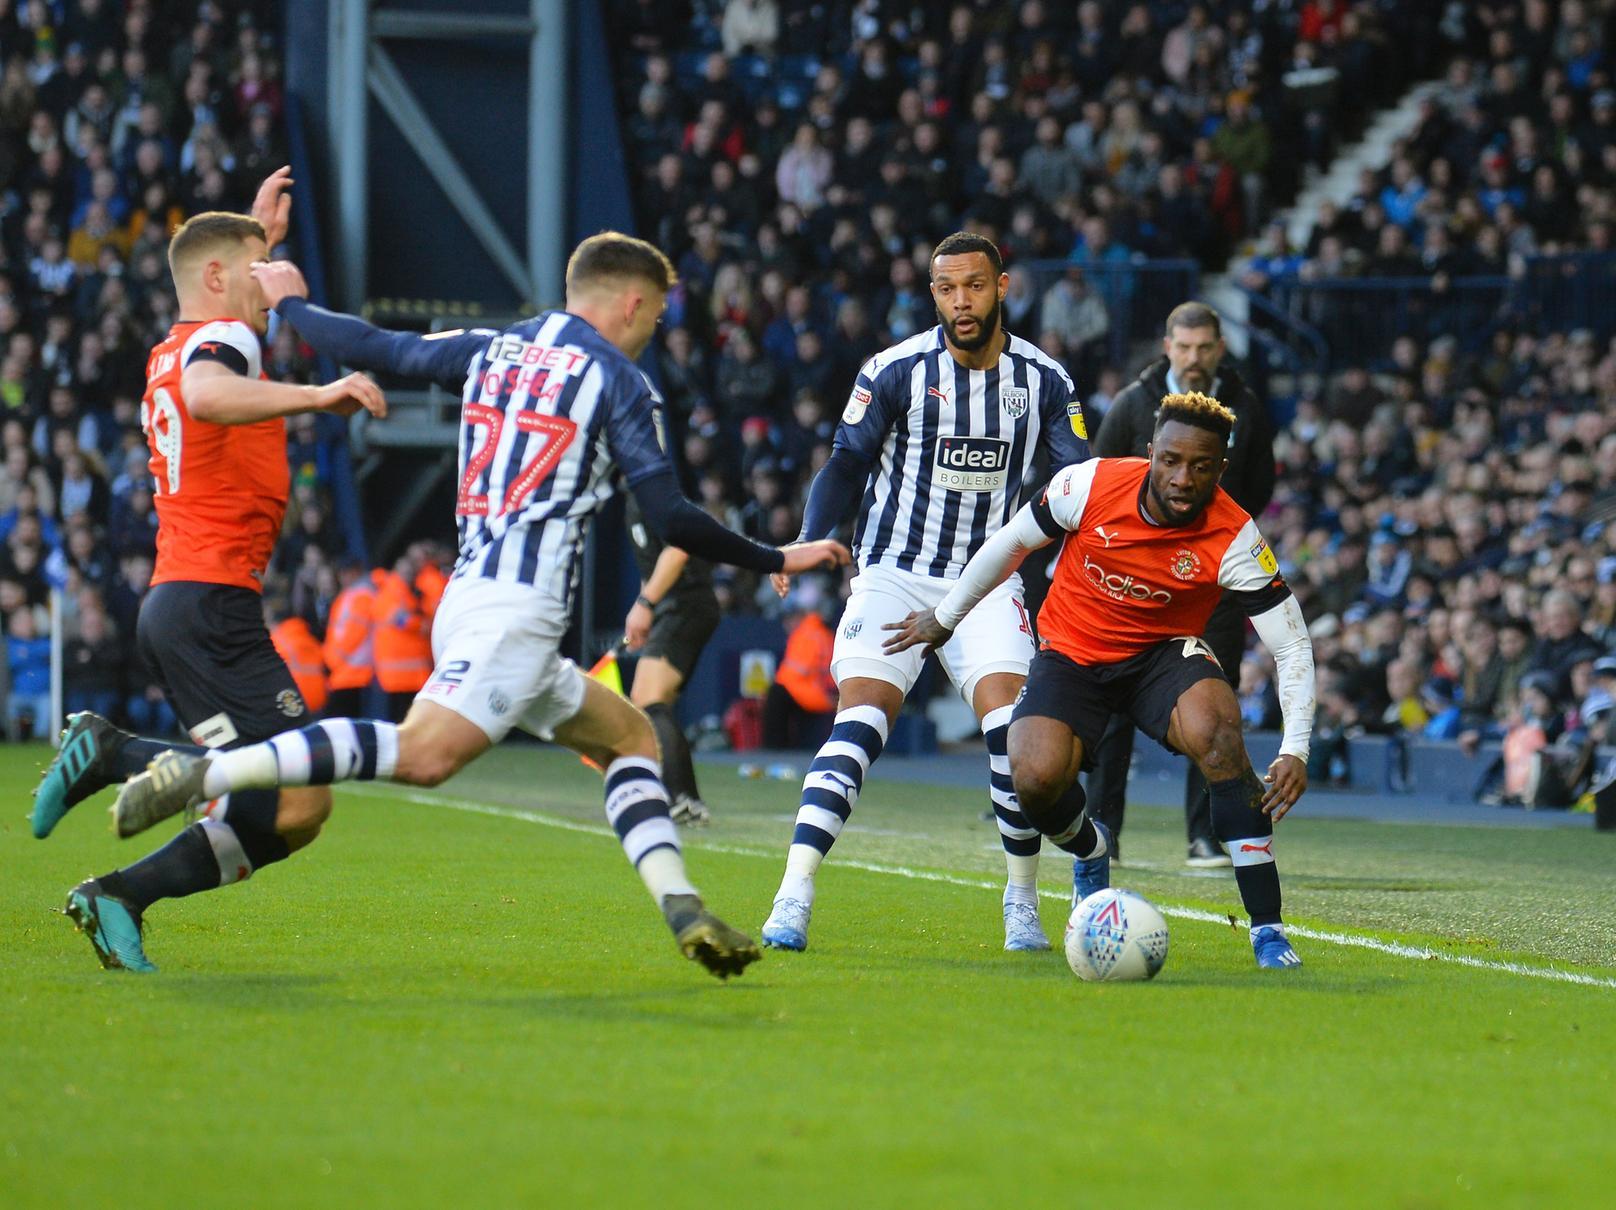 Luton were beaten 2-0 by West Bromwich Albion on Saturday